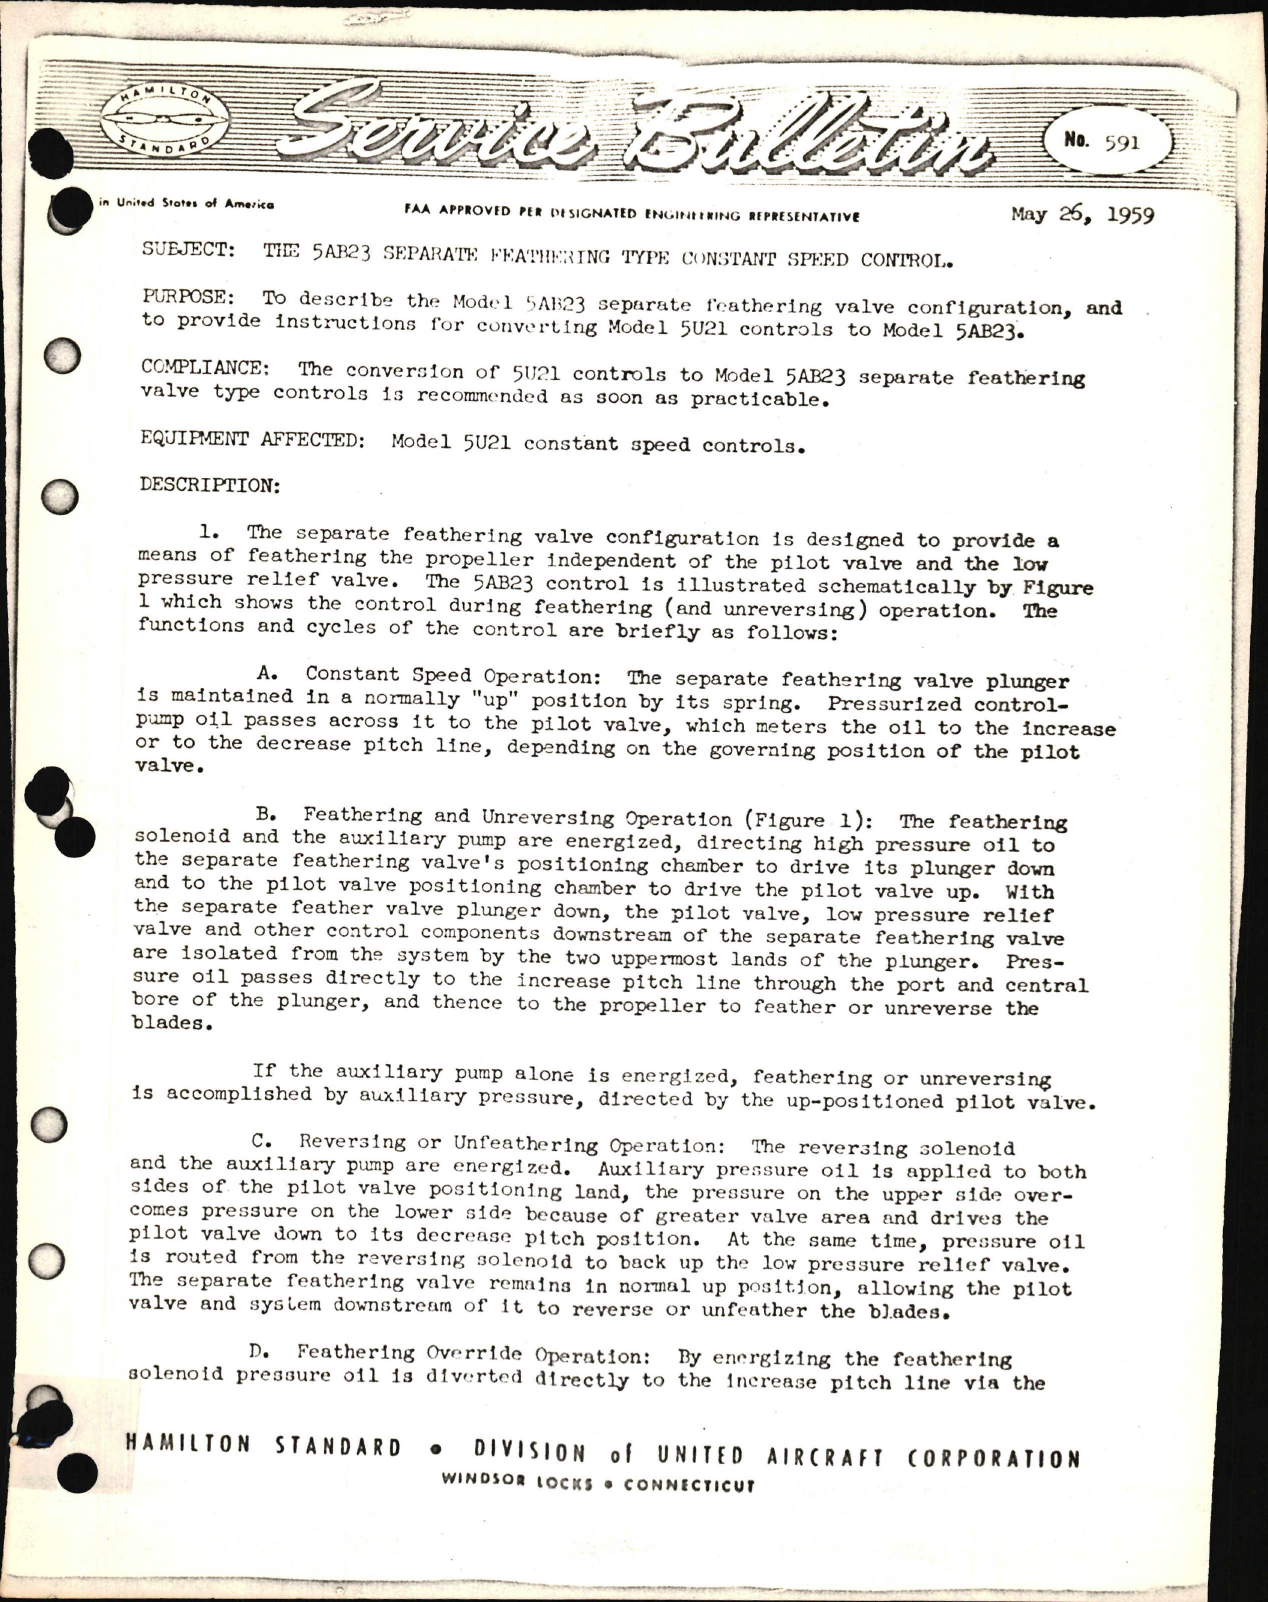 Sample page 1 from AirCorps Library document: The 5AB23 Separate Feathering Type Constant Speed Control